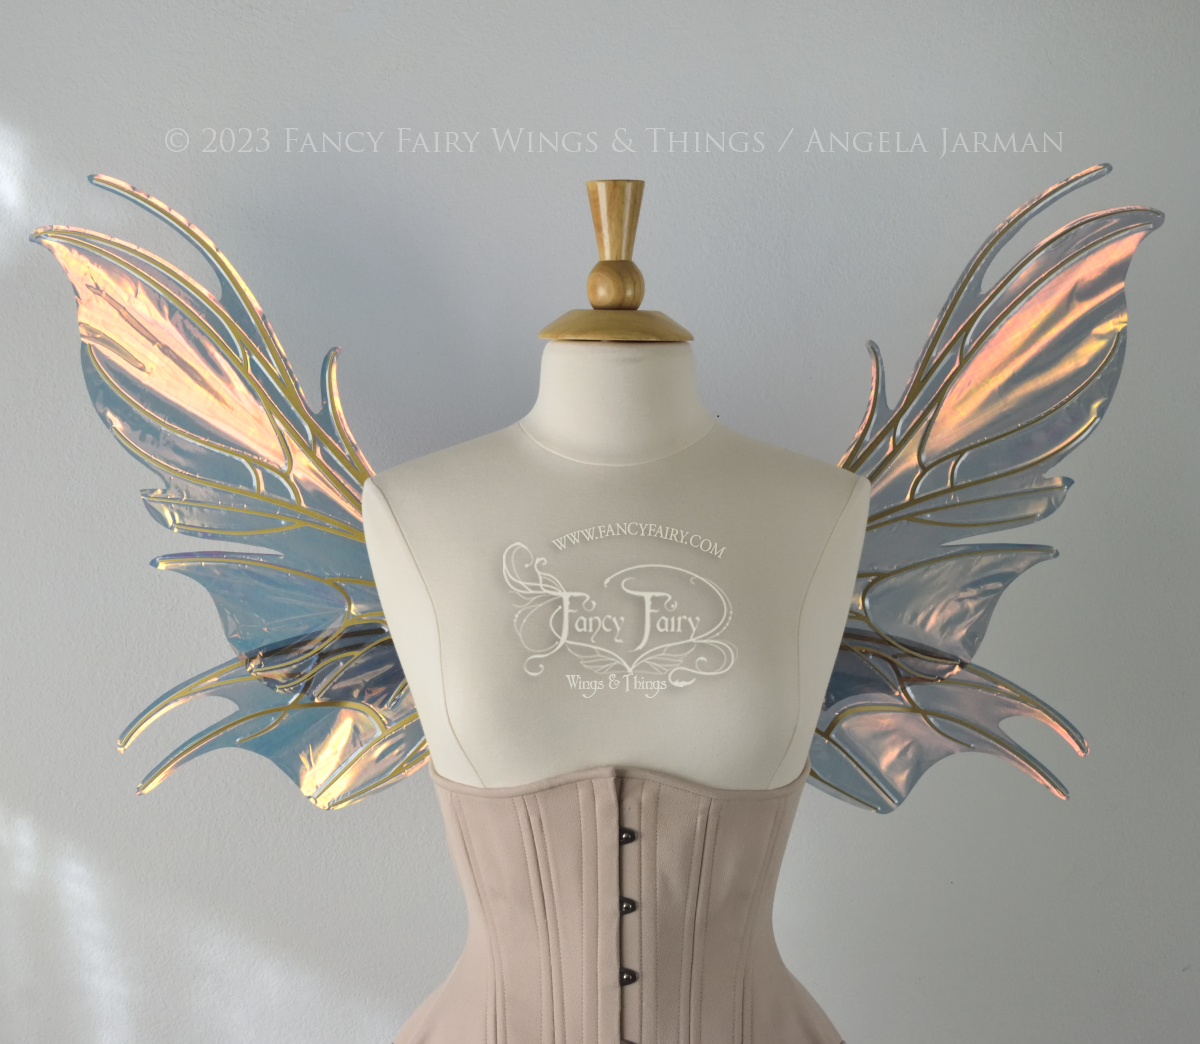 Front view of iridescent orange & dark grey/blue fairy wings with spikey veins, worn by a dress form